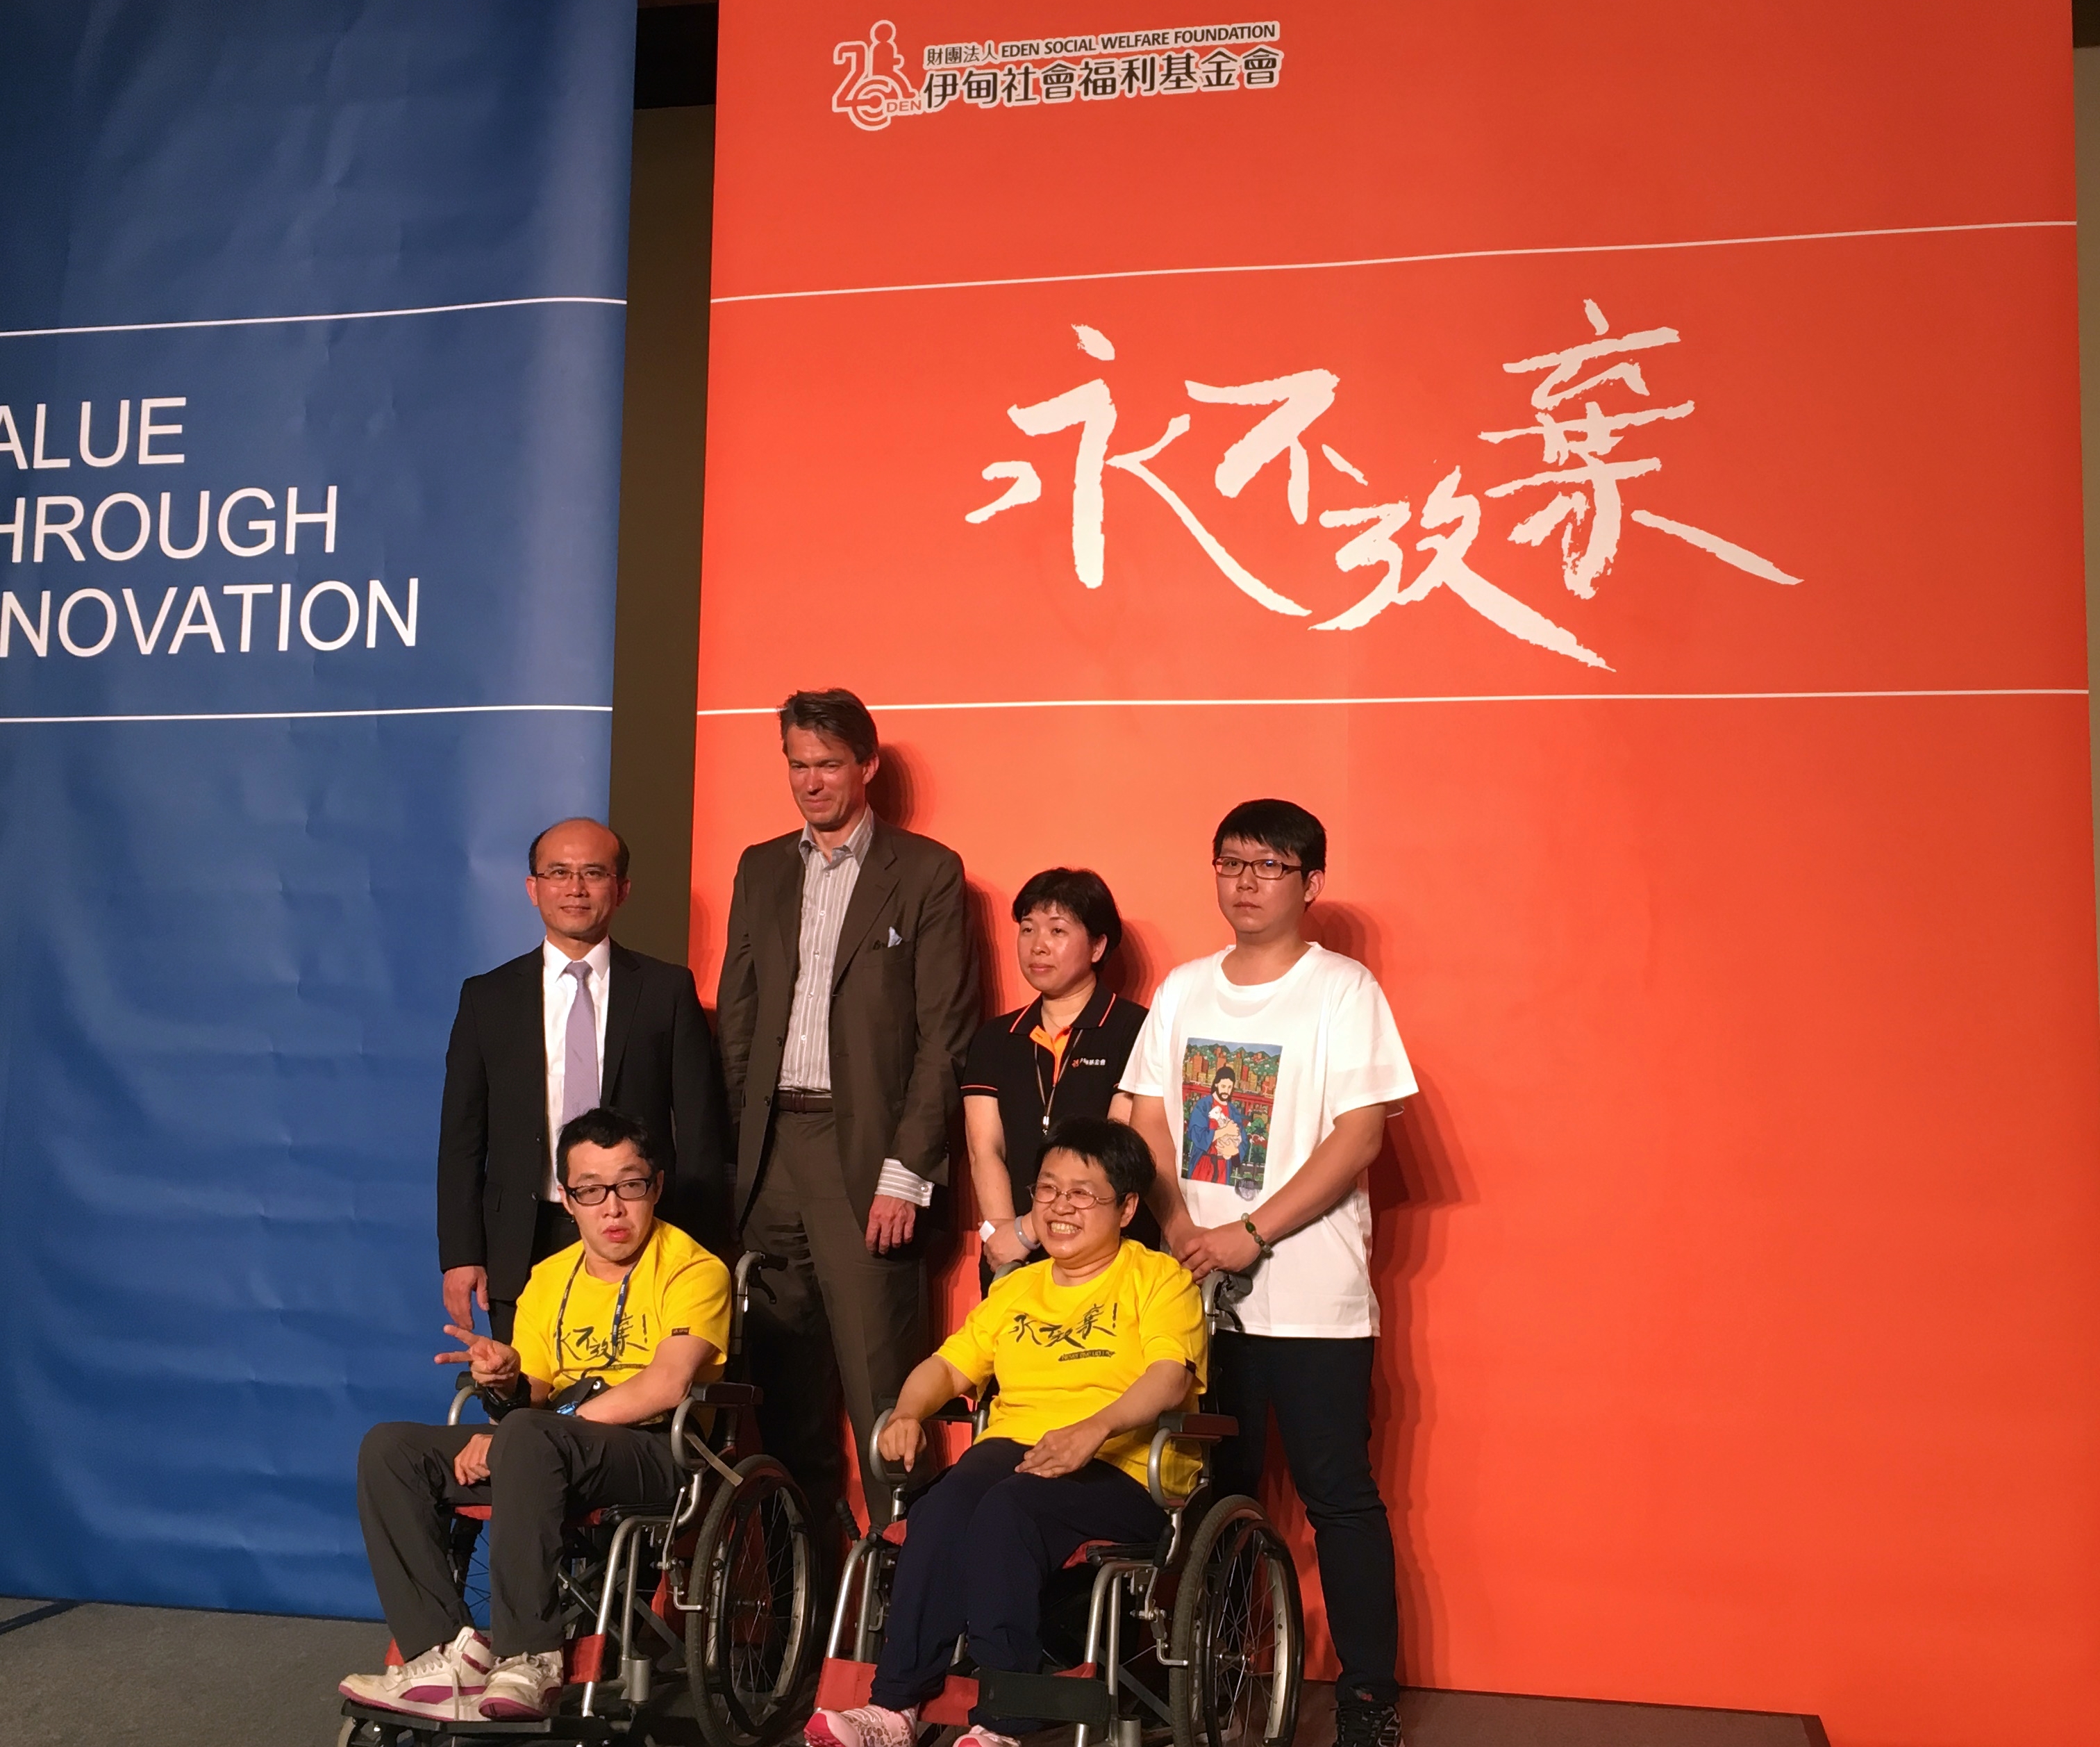 General Manager of Boehringer-Ingelheim Taiwan and other global shareholders to encourage Eden’s artists with disabilities